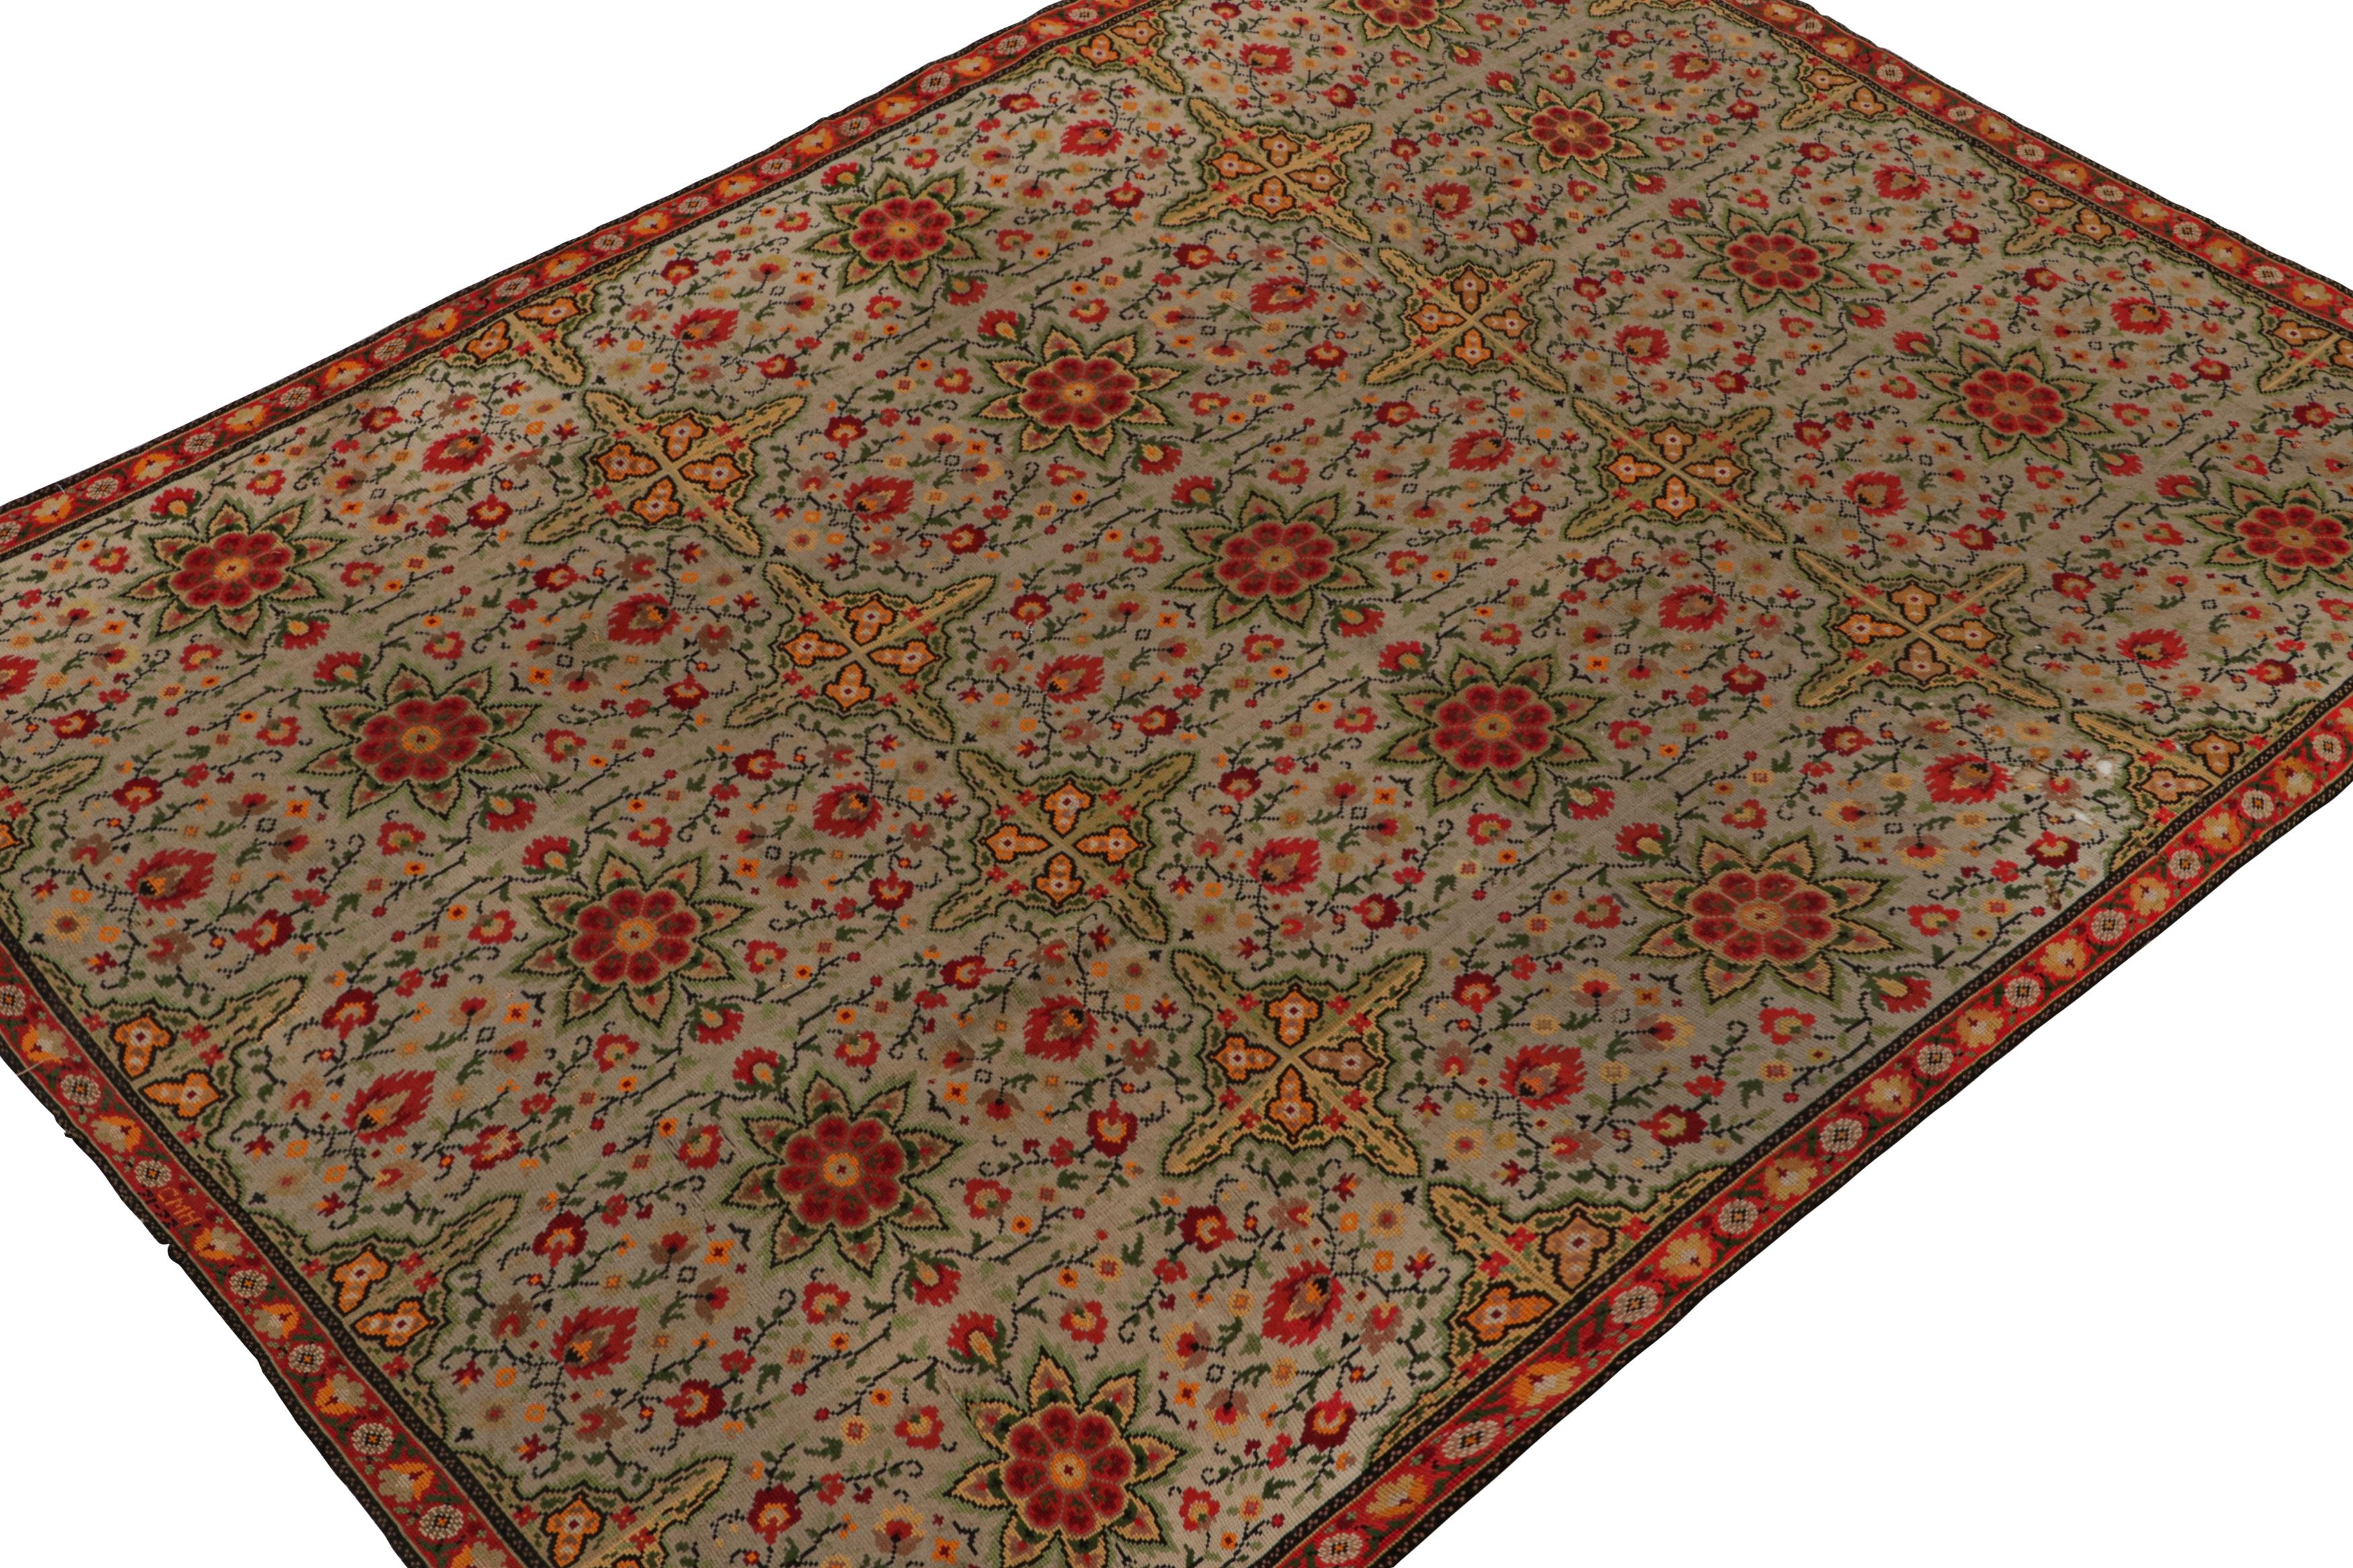 Handwoven in wool, circa 1920-1930, this 7x10 antique French Needlepoint rug, features a beige field with taupe notes, and floral patterns in red and green. 

On the Design: 

Connoisseurs will admire the movement and variation of floral patterns in